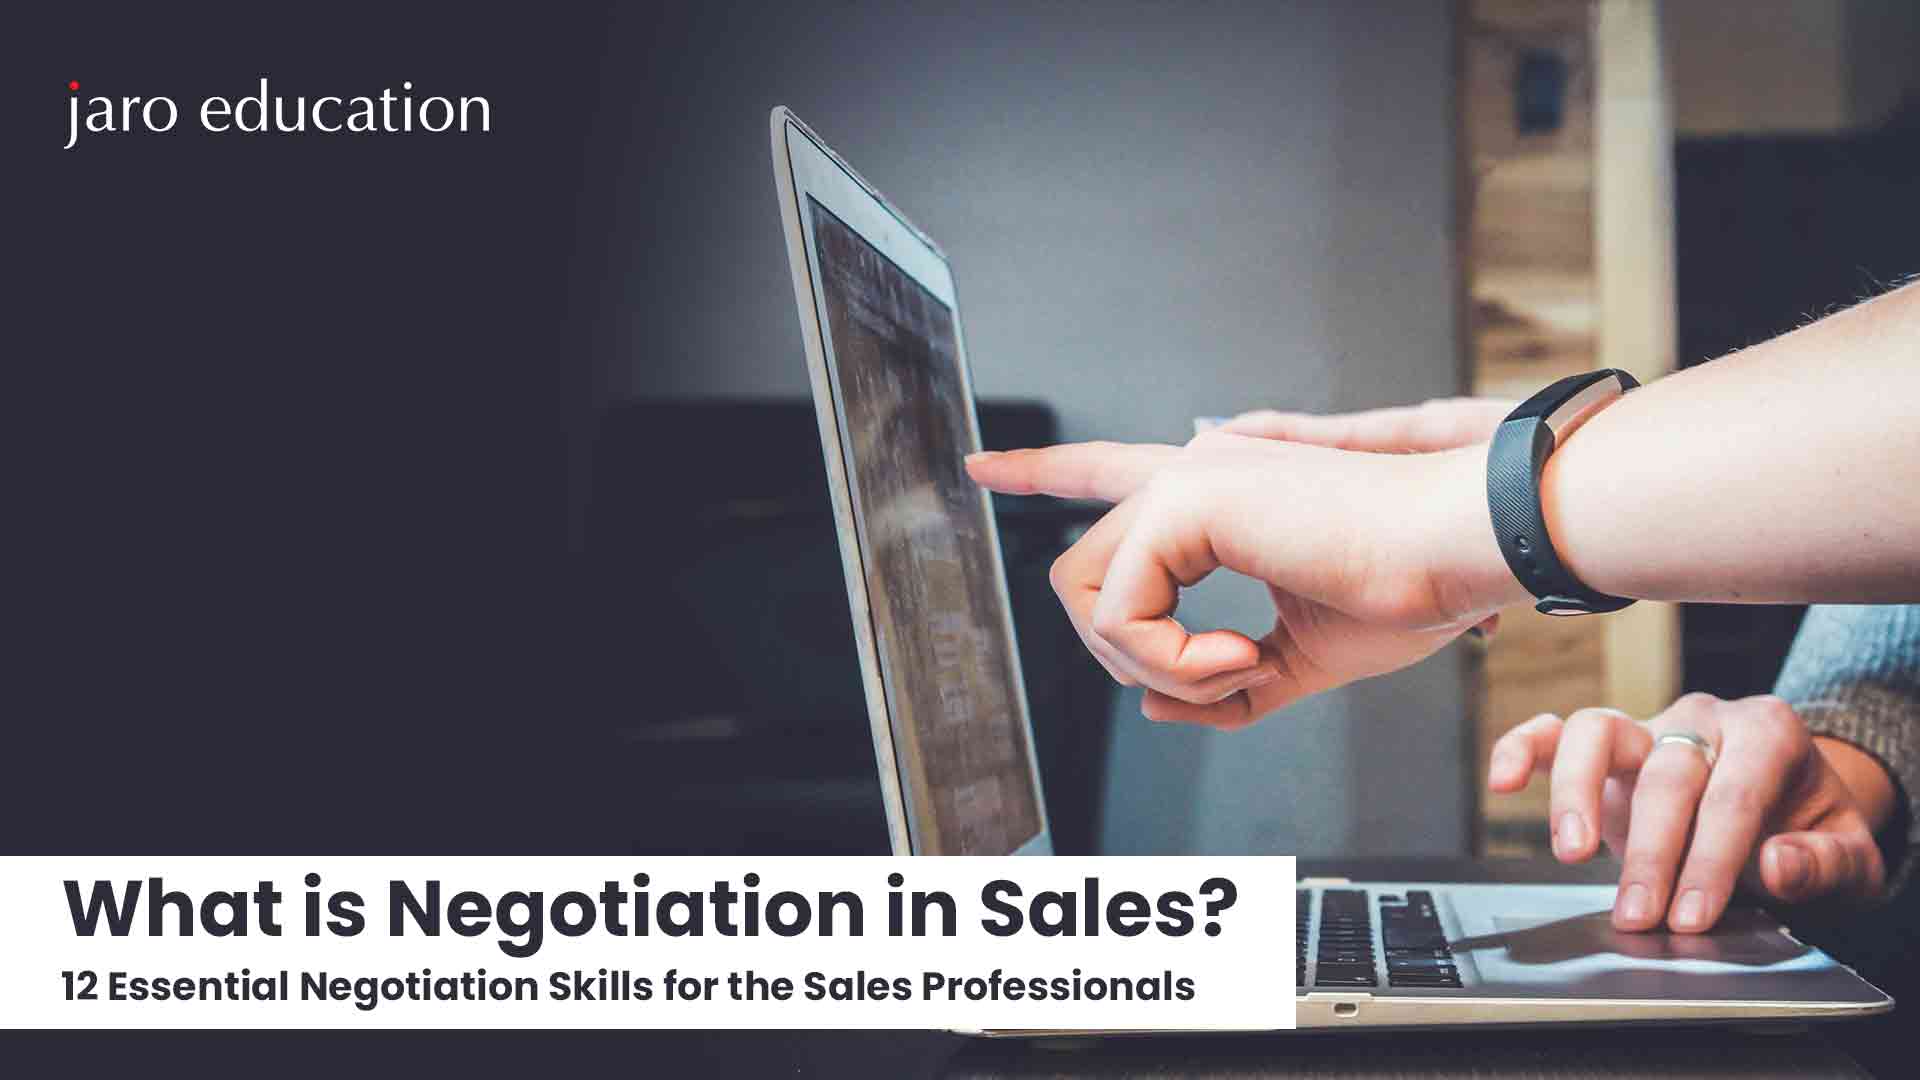 What is Negotiation in Sales 12 Essential Negotiation Skills for the Sales Professionals